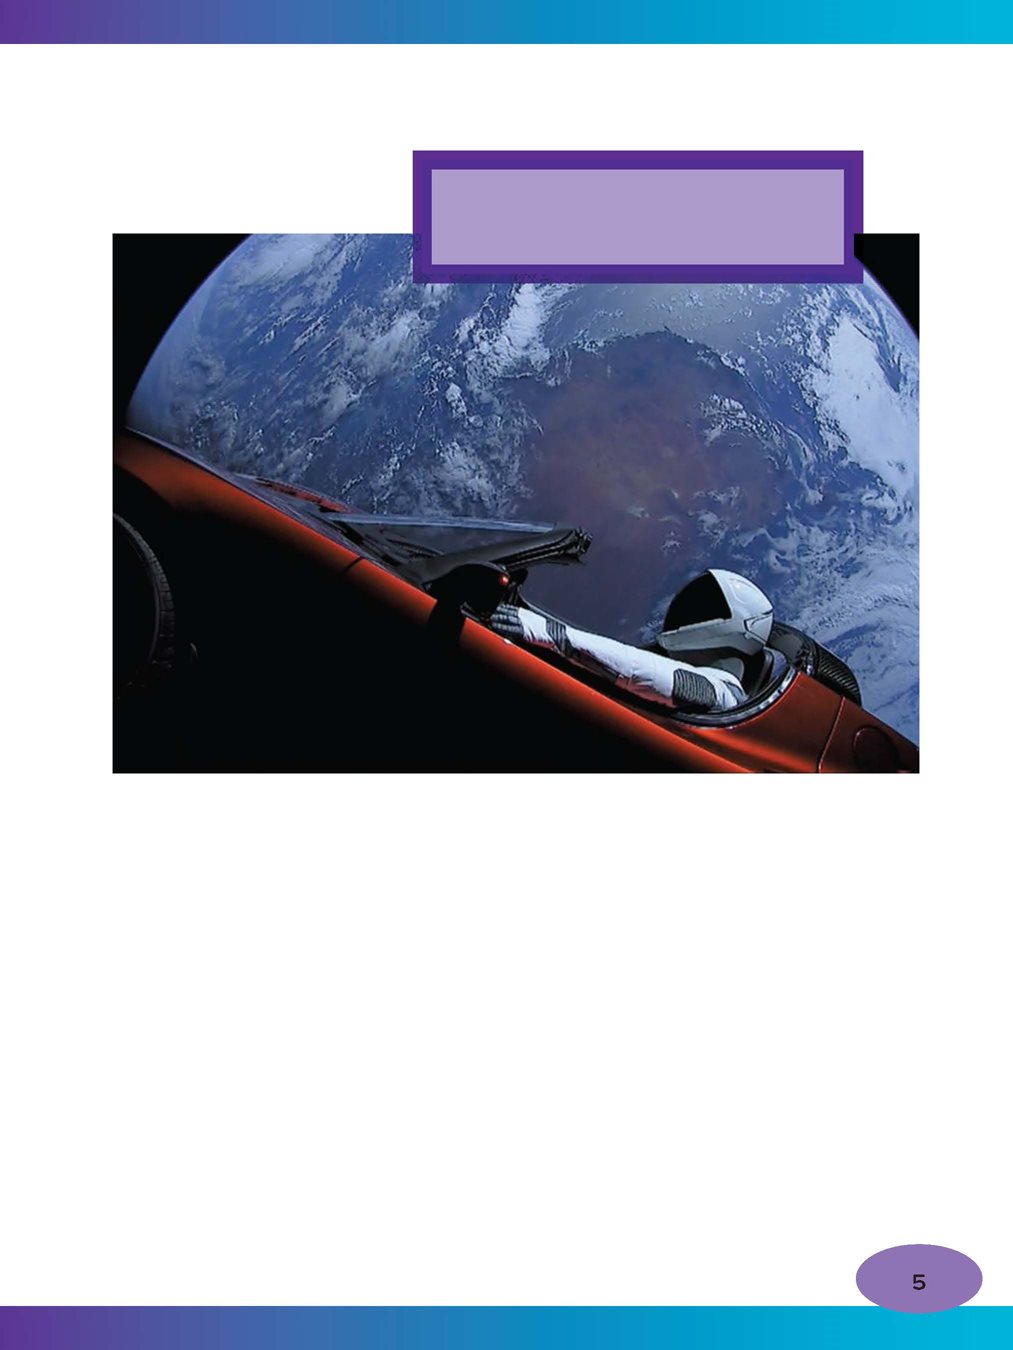 Starman sits in the Roadster with Earth in the background Sitting on top - photo 7